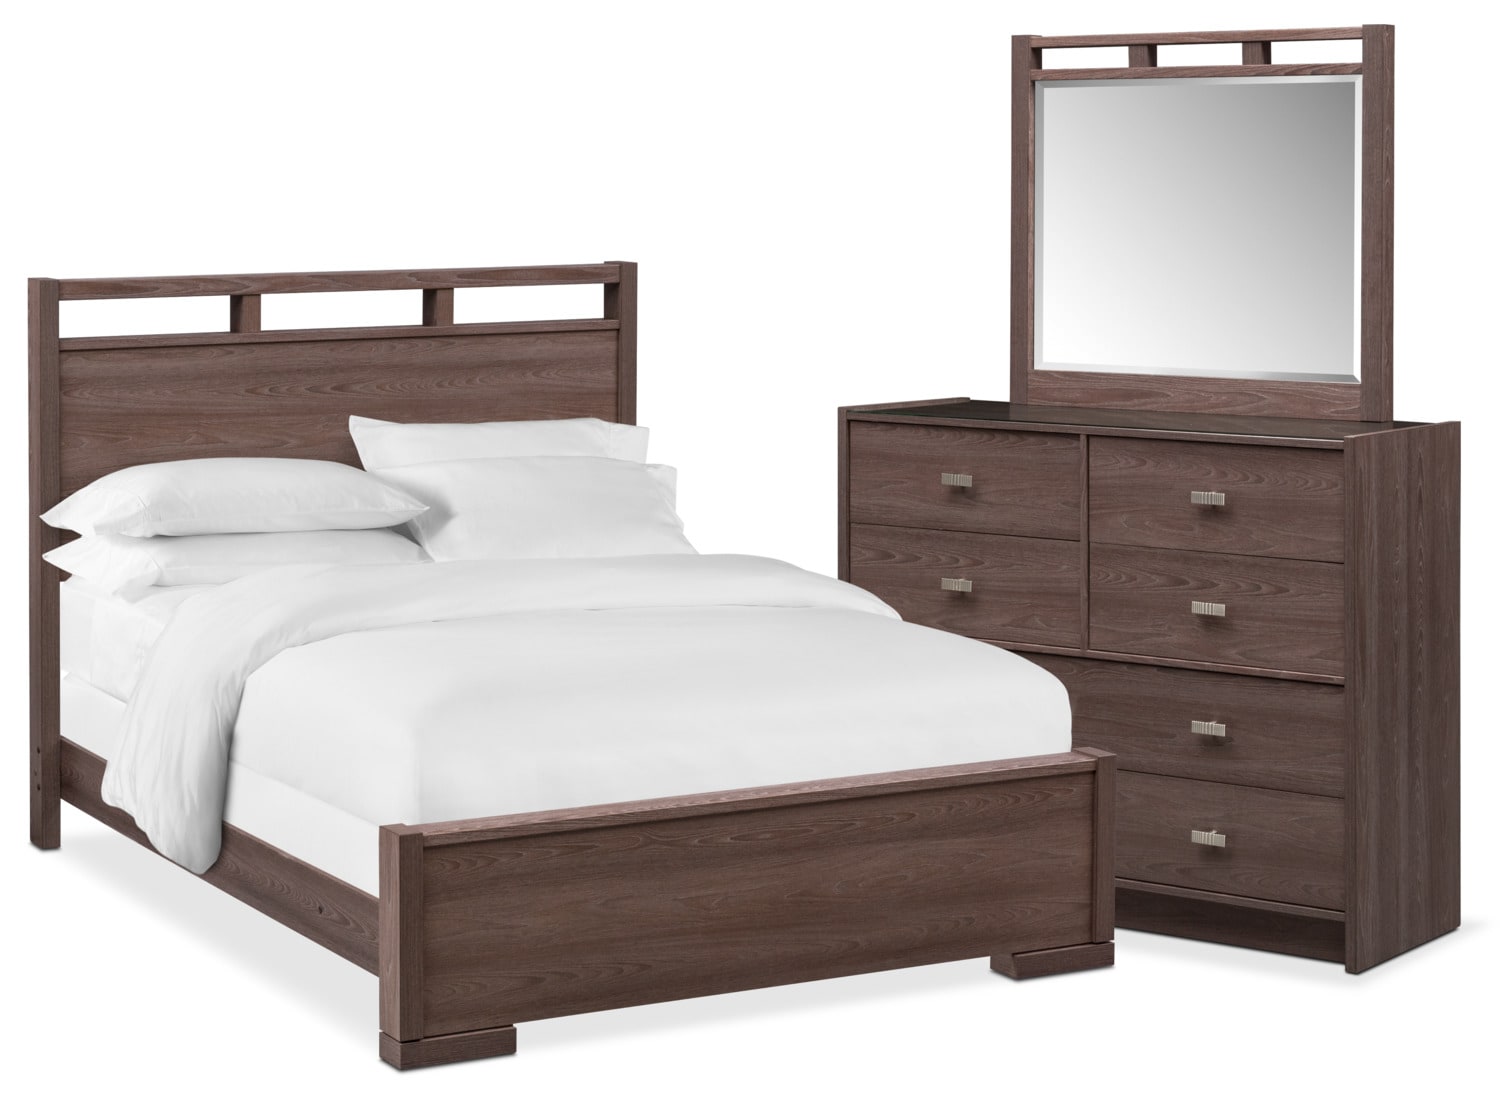 Value City Furniture Childrens Bedroom Sets Cheaper Than Retail Price Buy Clothing Accessories And Lifestyle Products For Women Men